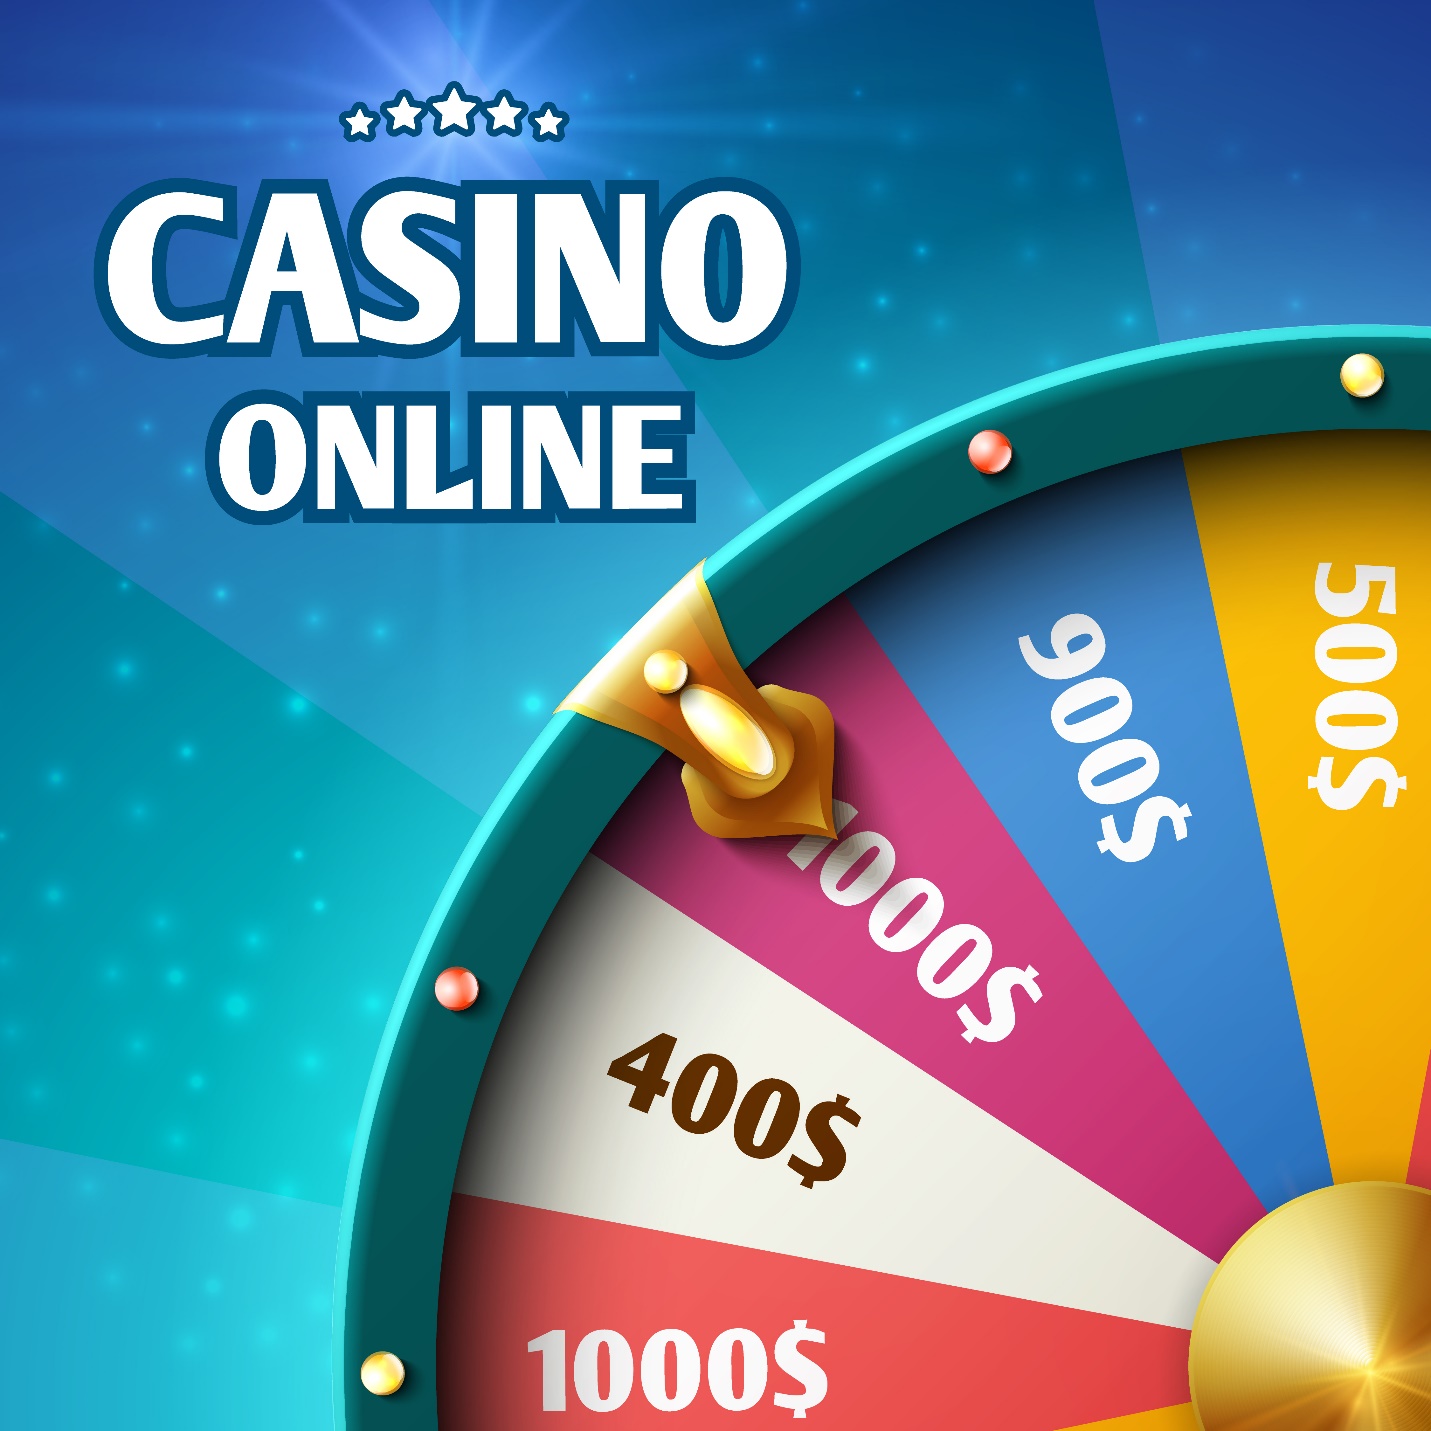 free game spin and win